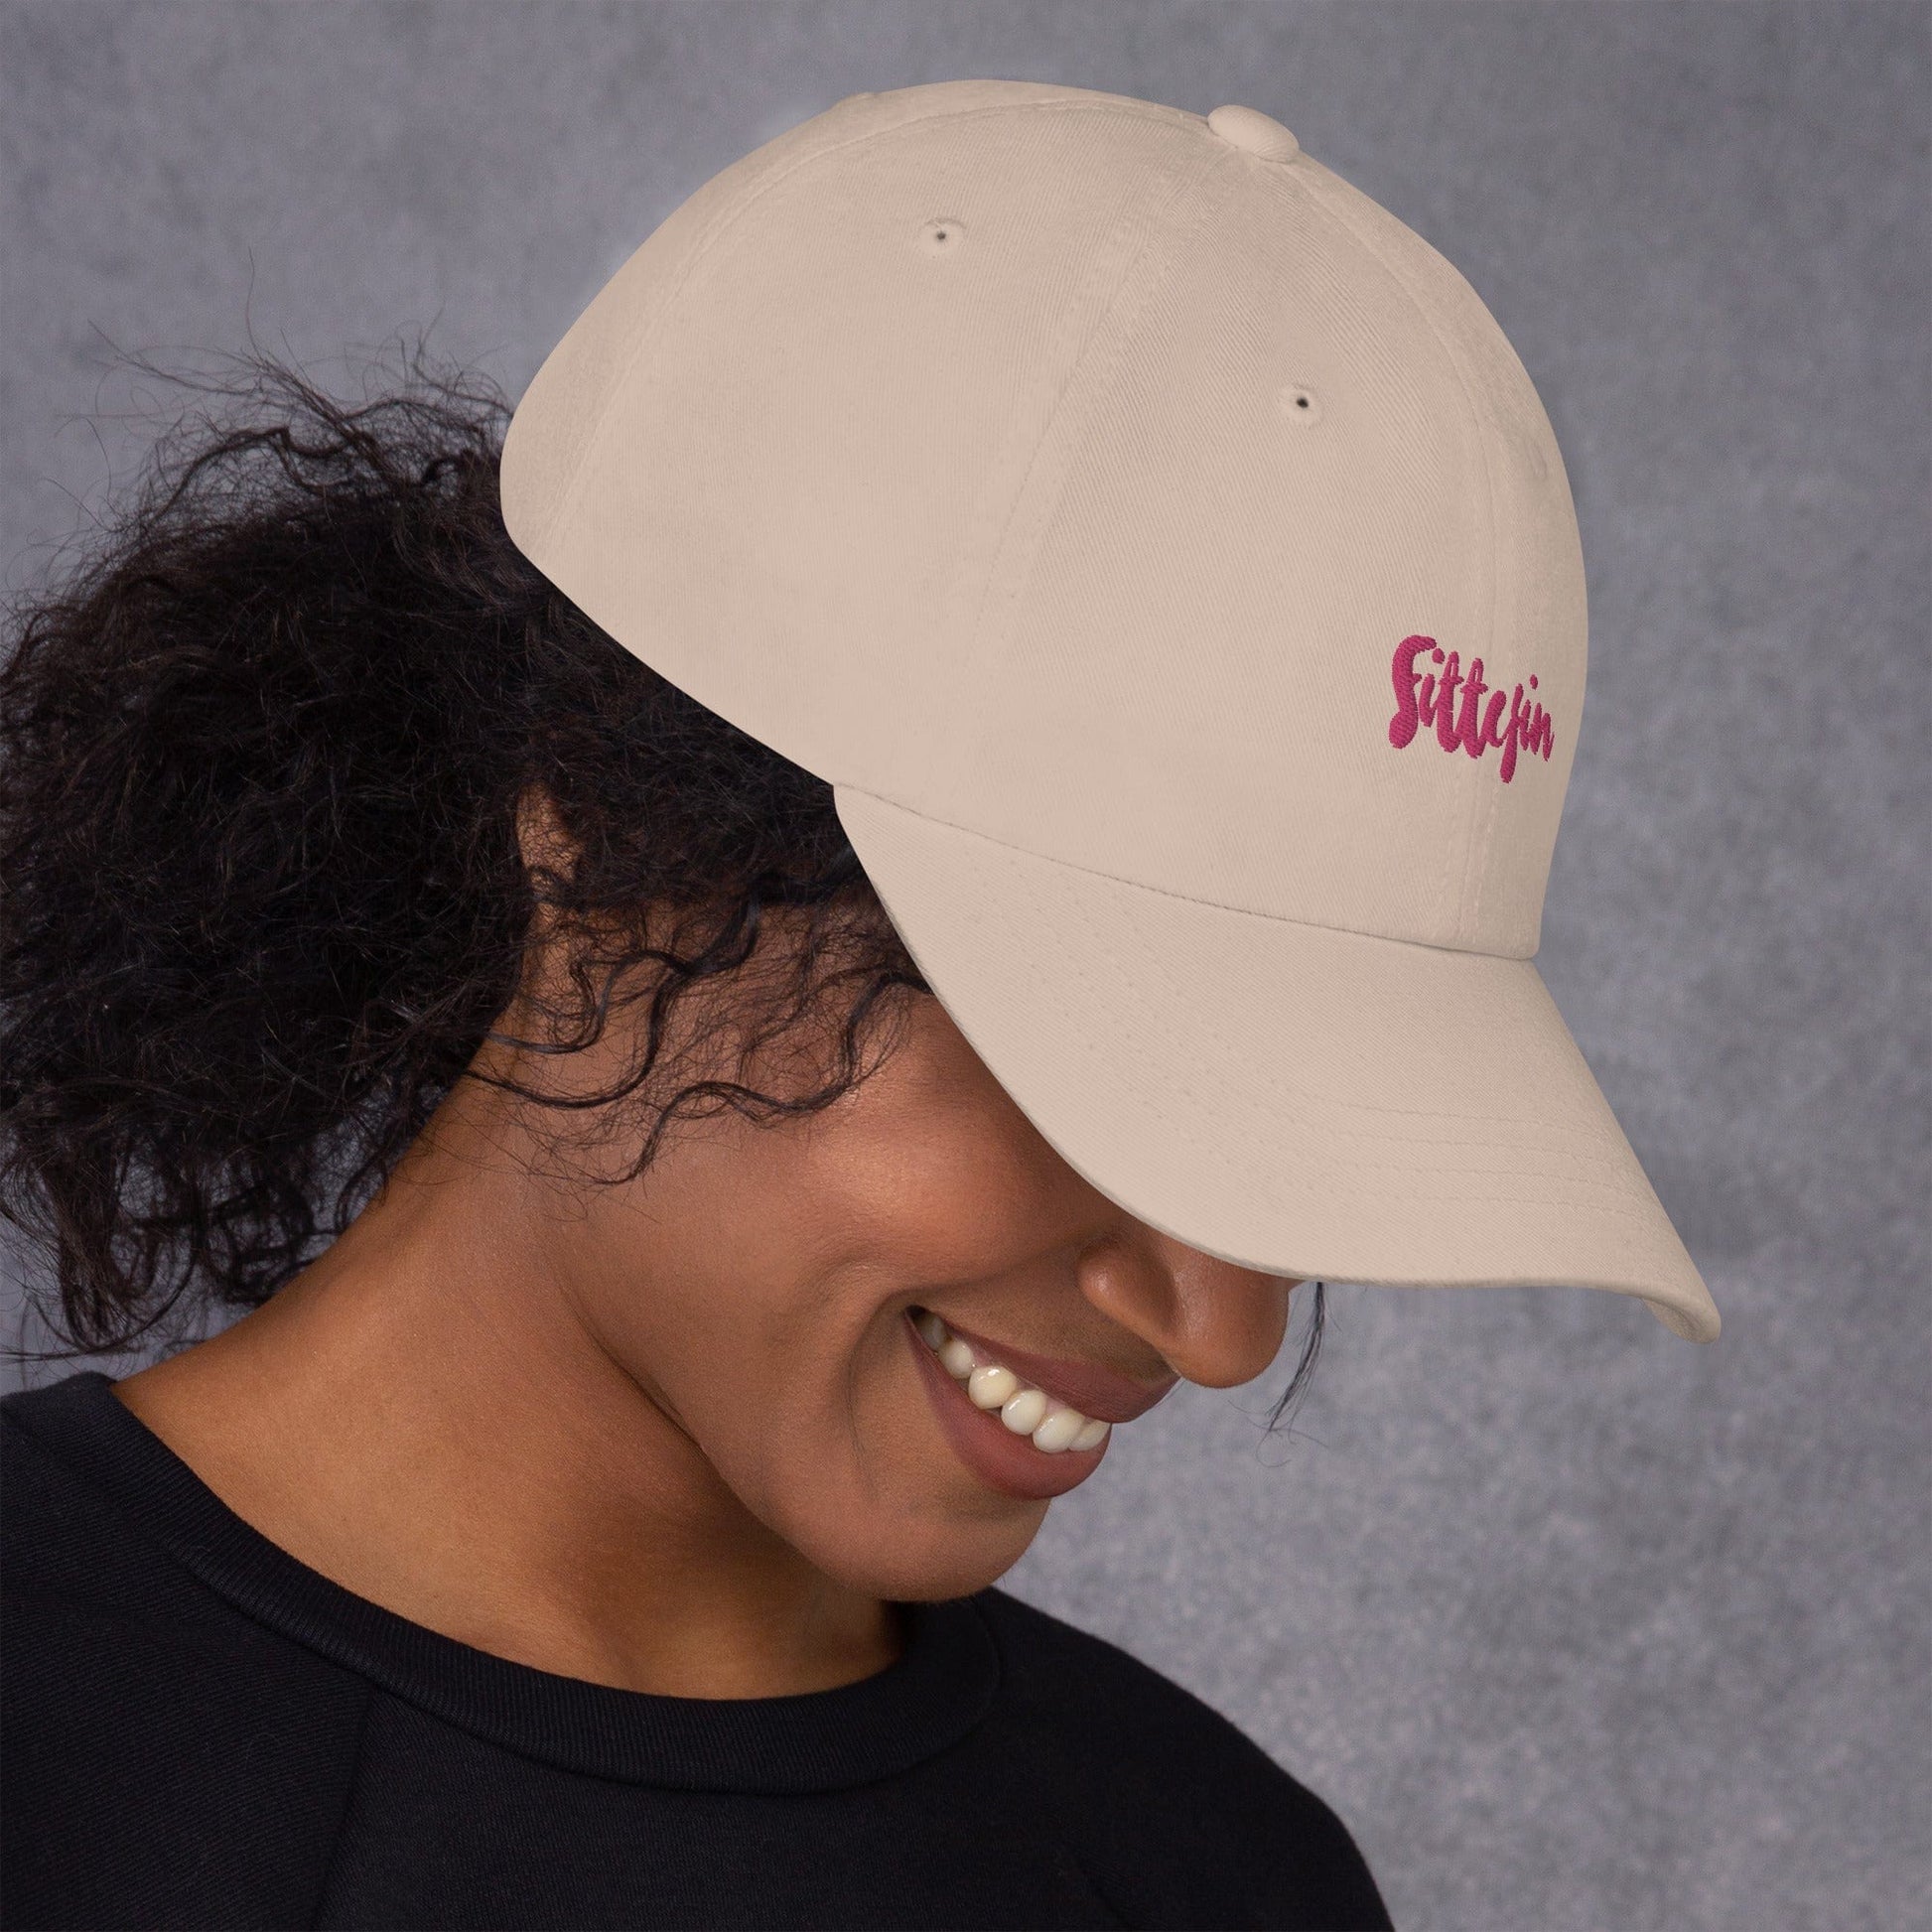 VAGPWR Fittefin - Dad hat